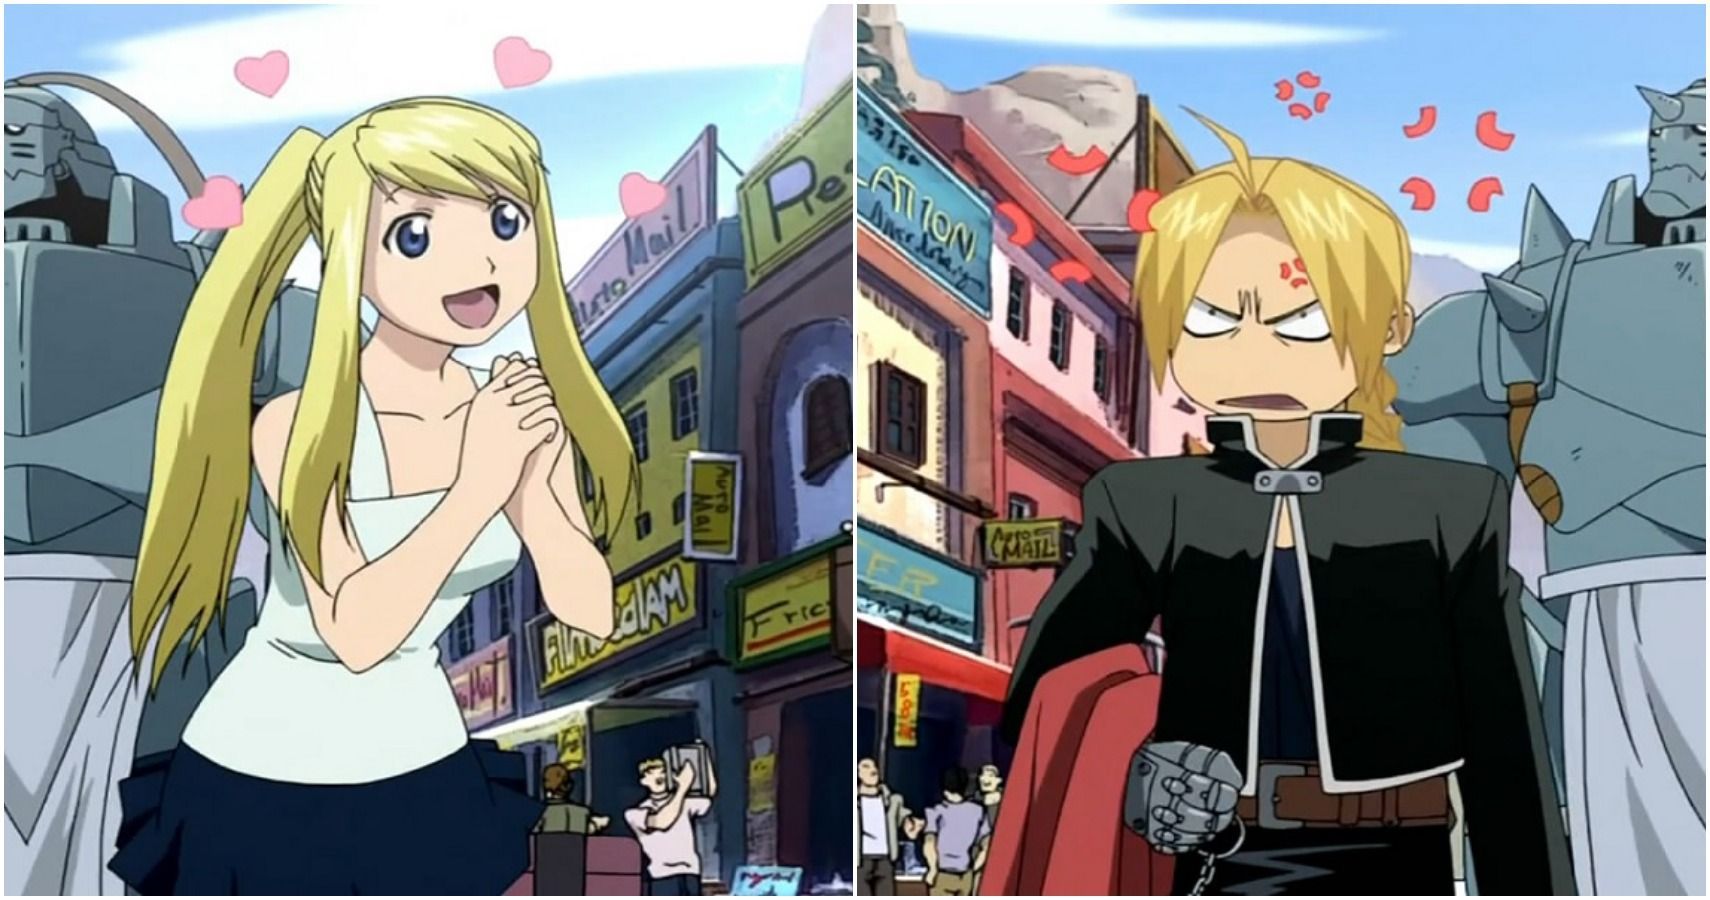 Who's the best couple? Write your opinion. [Fullmetal Alchemist